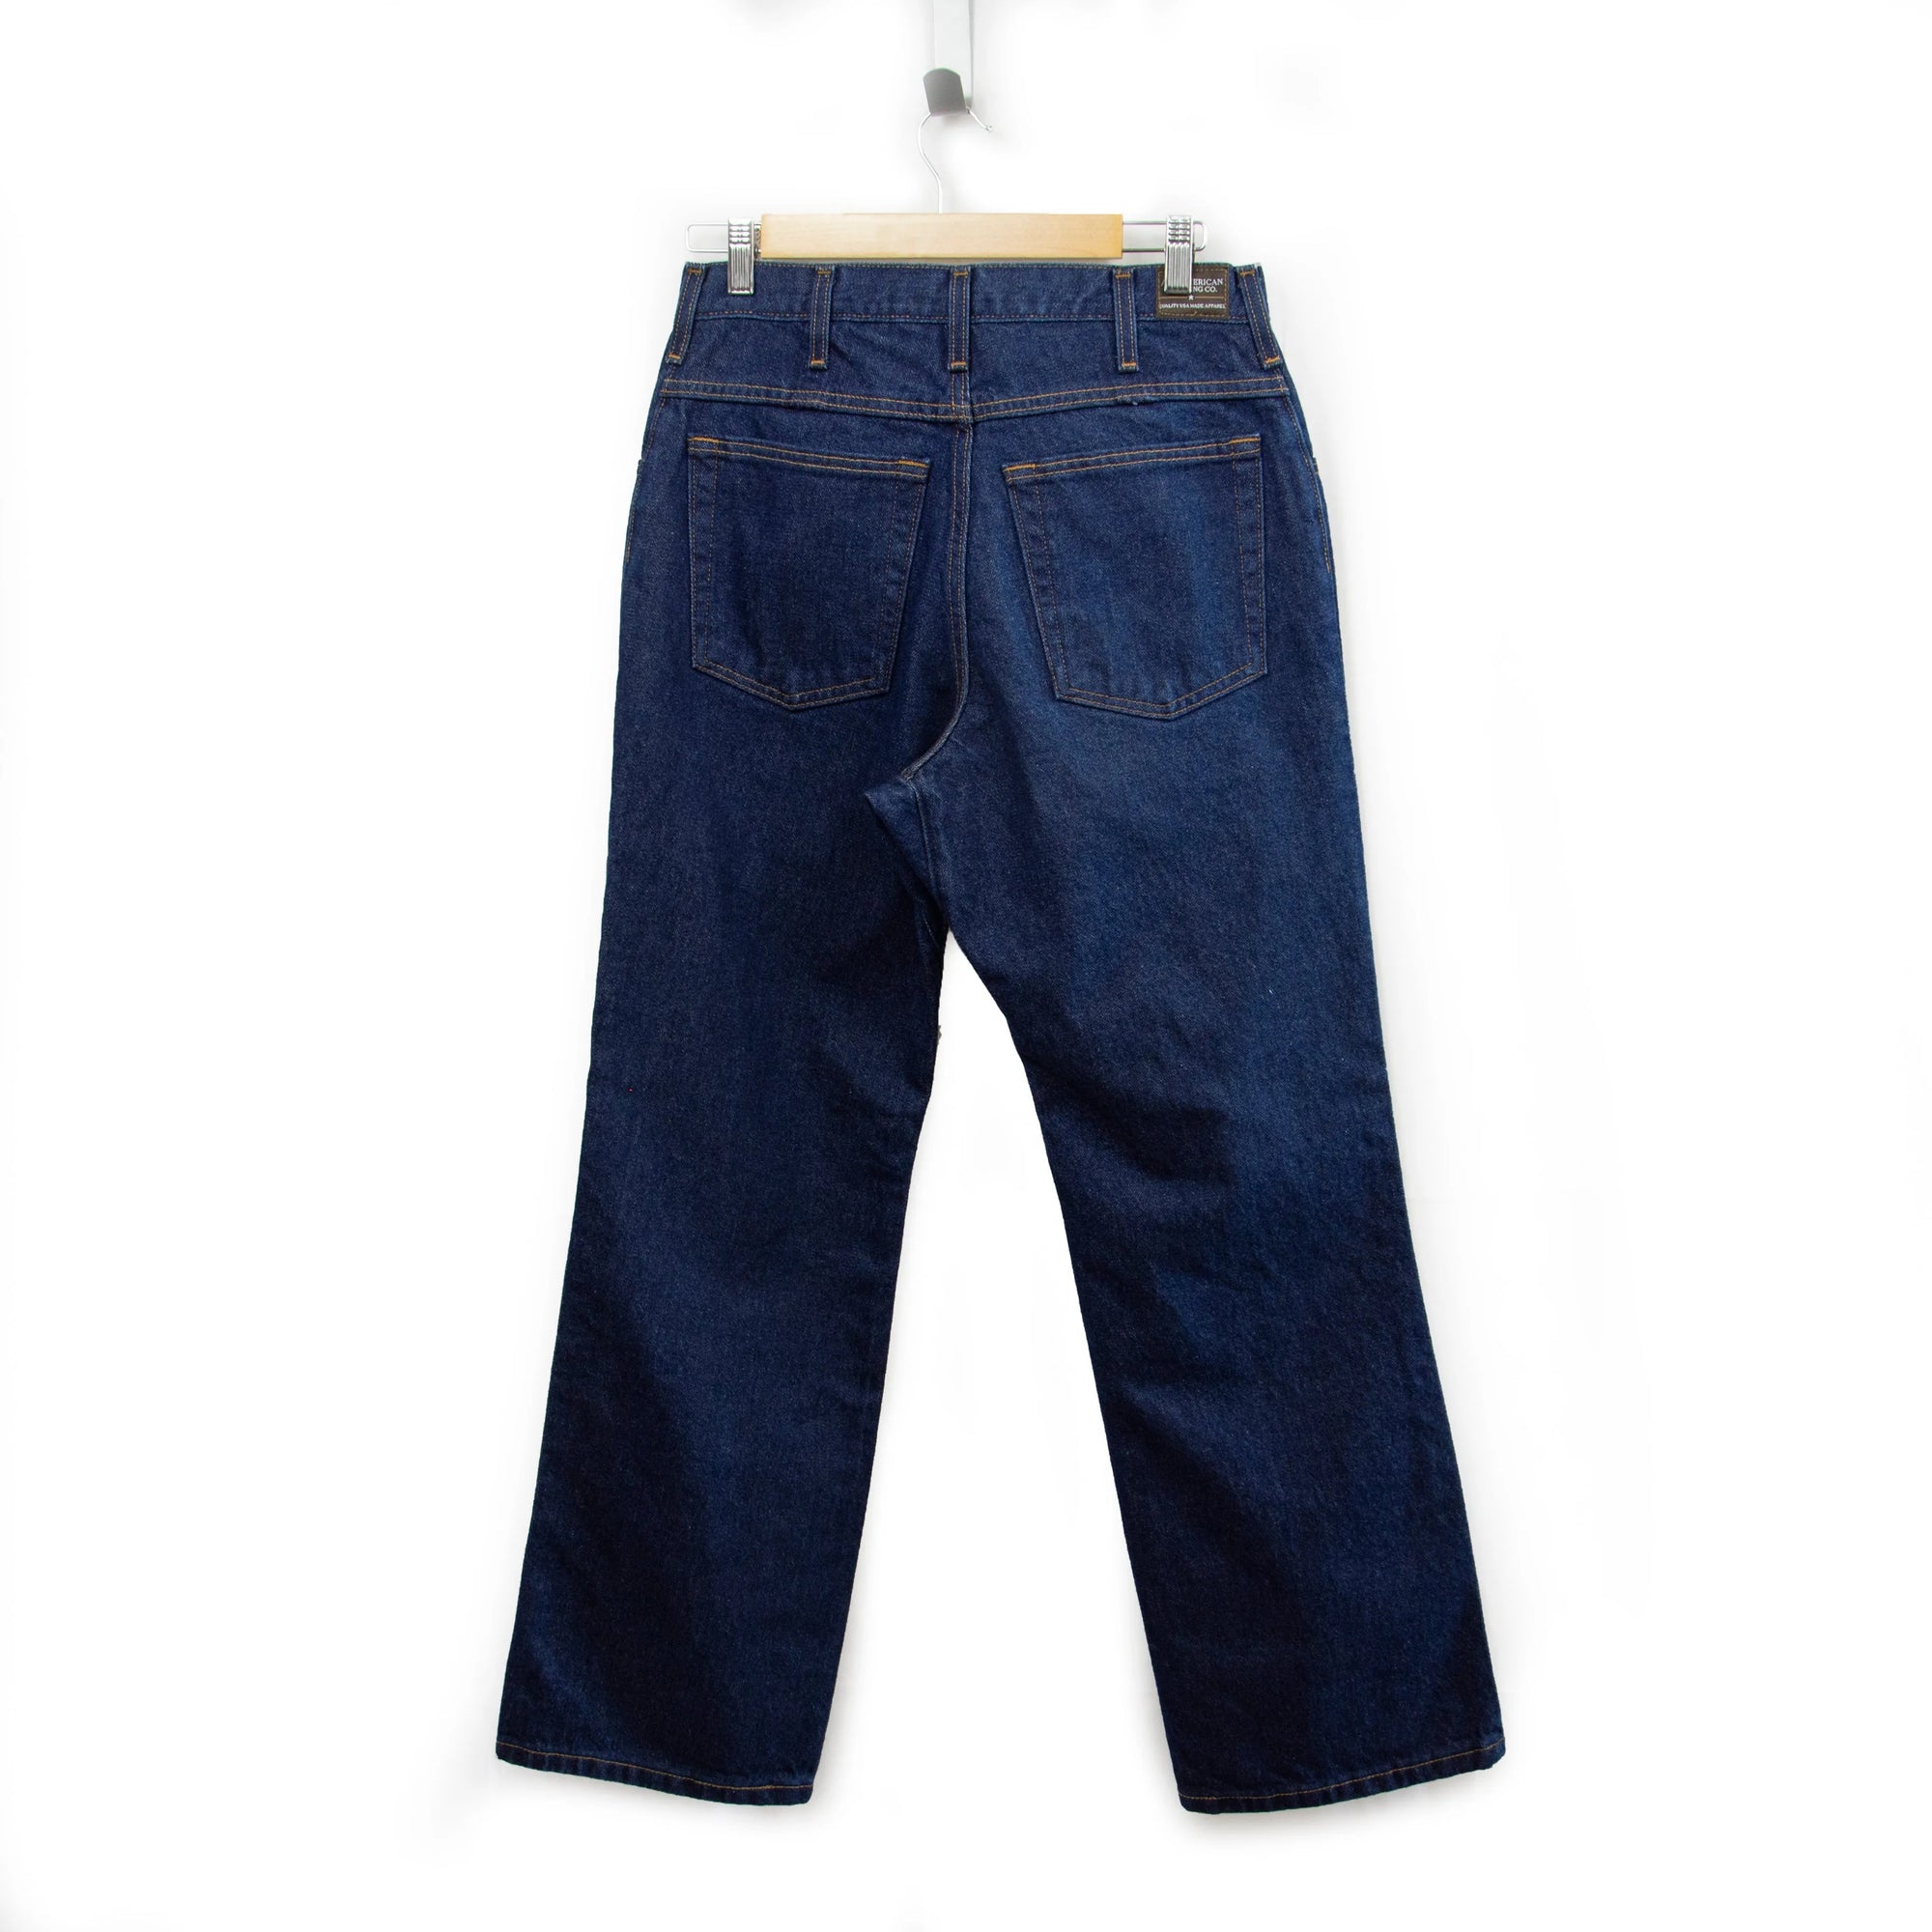 Men's Boot Cut Jean with Gusset | All American Clothing Co